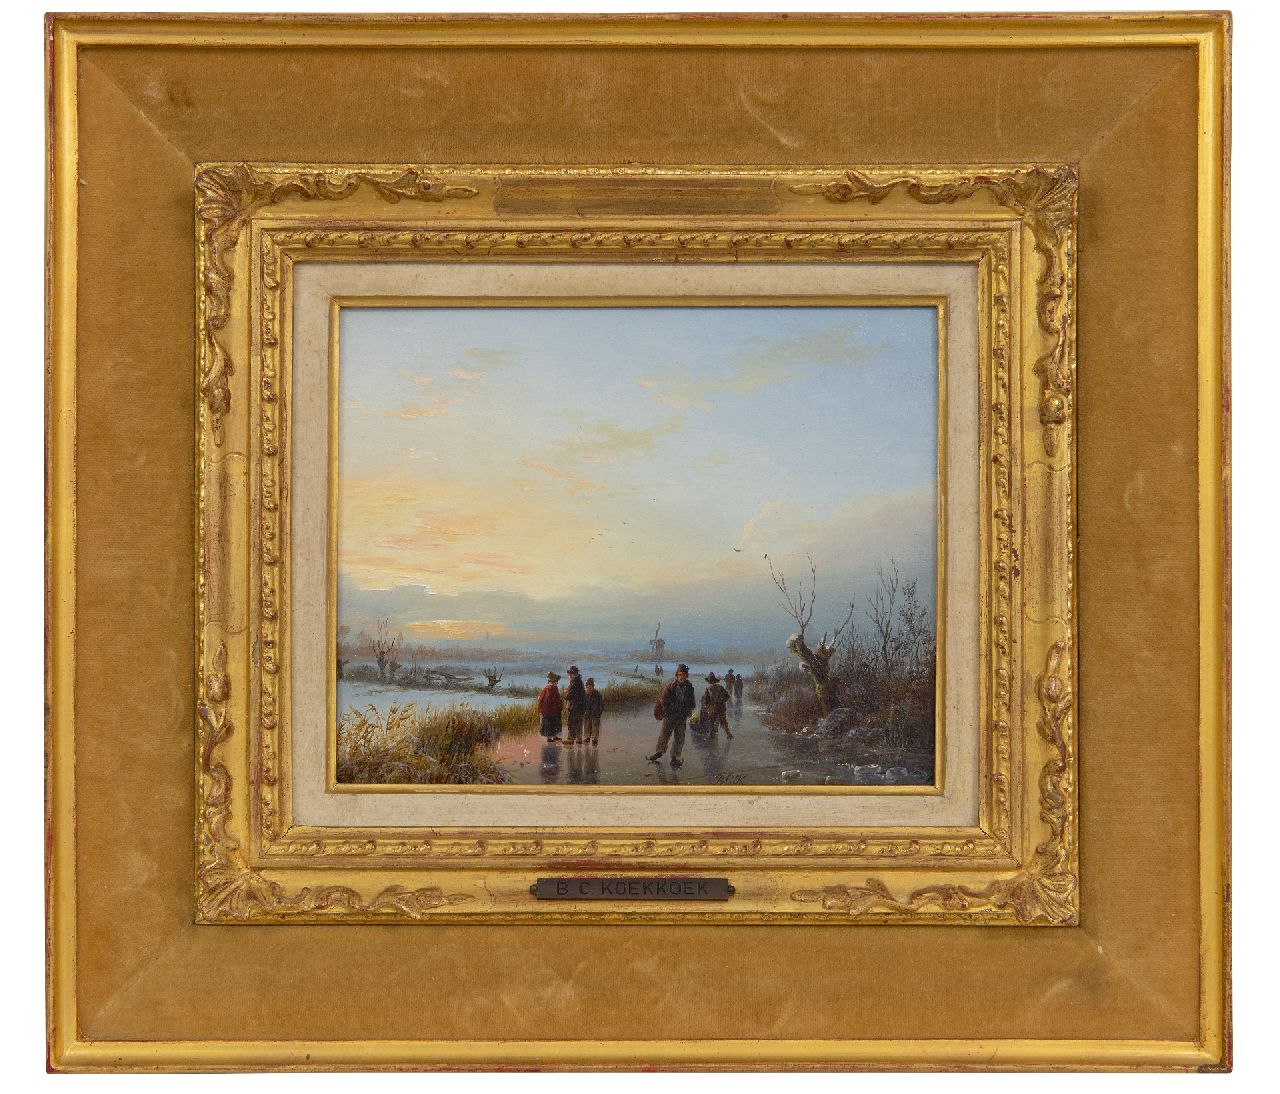 Koekkoek B.C.  | Barend Cornelis Koekkoek | Paintings offered for sale | Skaters in a winter landscape, oil on panel 15.5 x 19.5 cm, signed l.c. with initials and painted  jaren '30